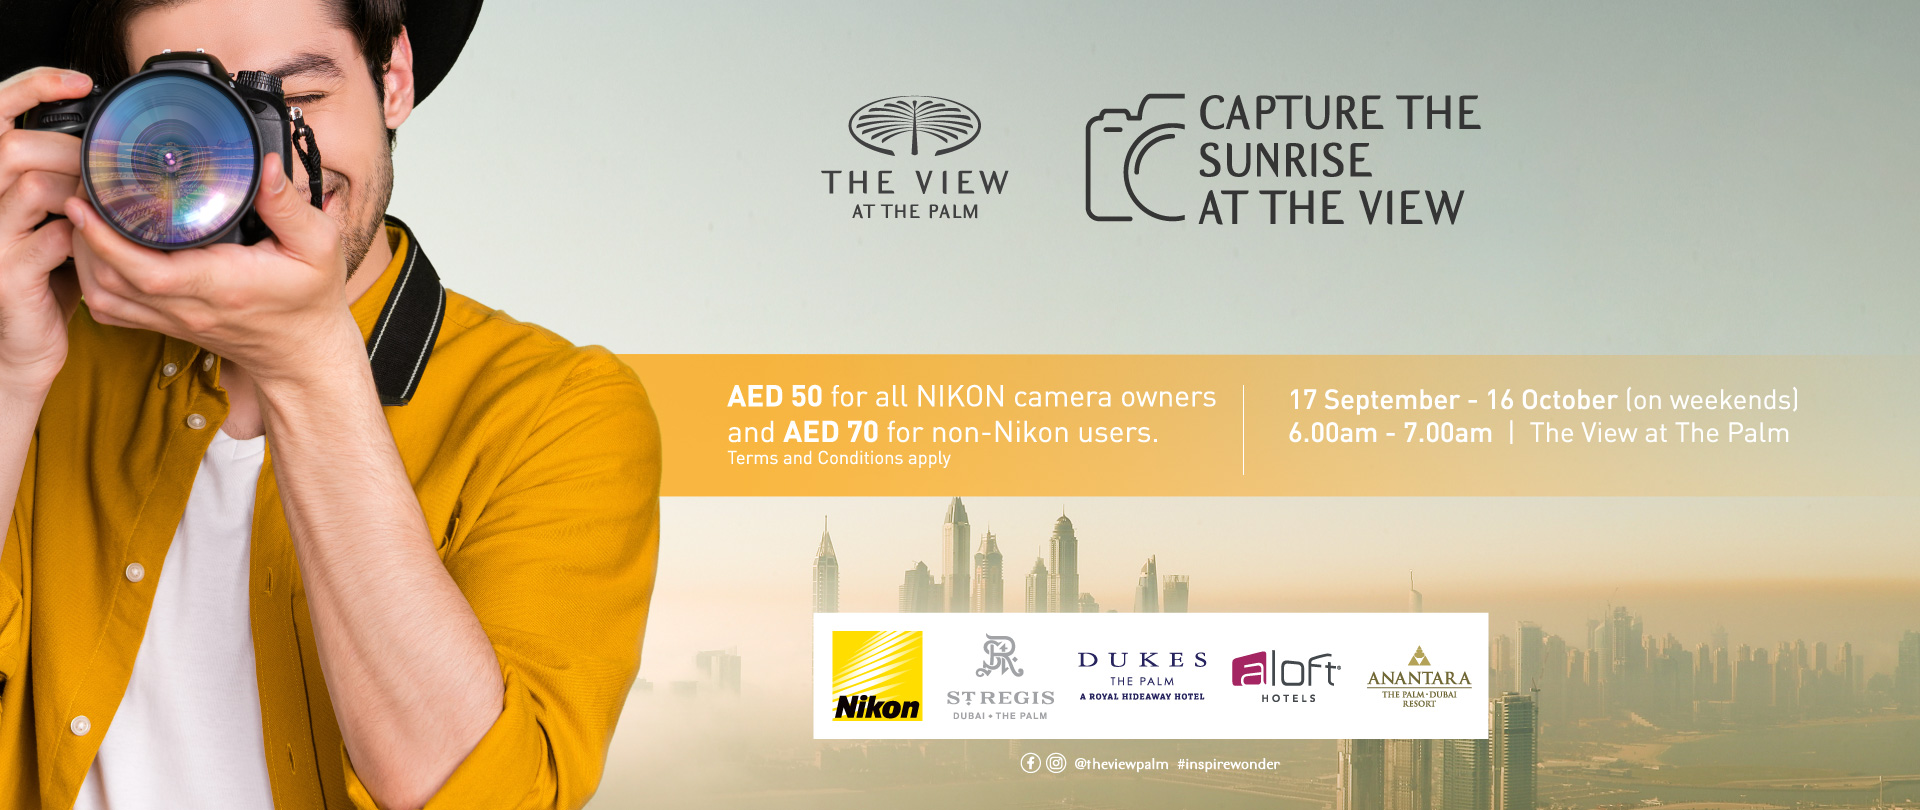 Capture the Sunrise at The view 